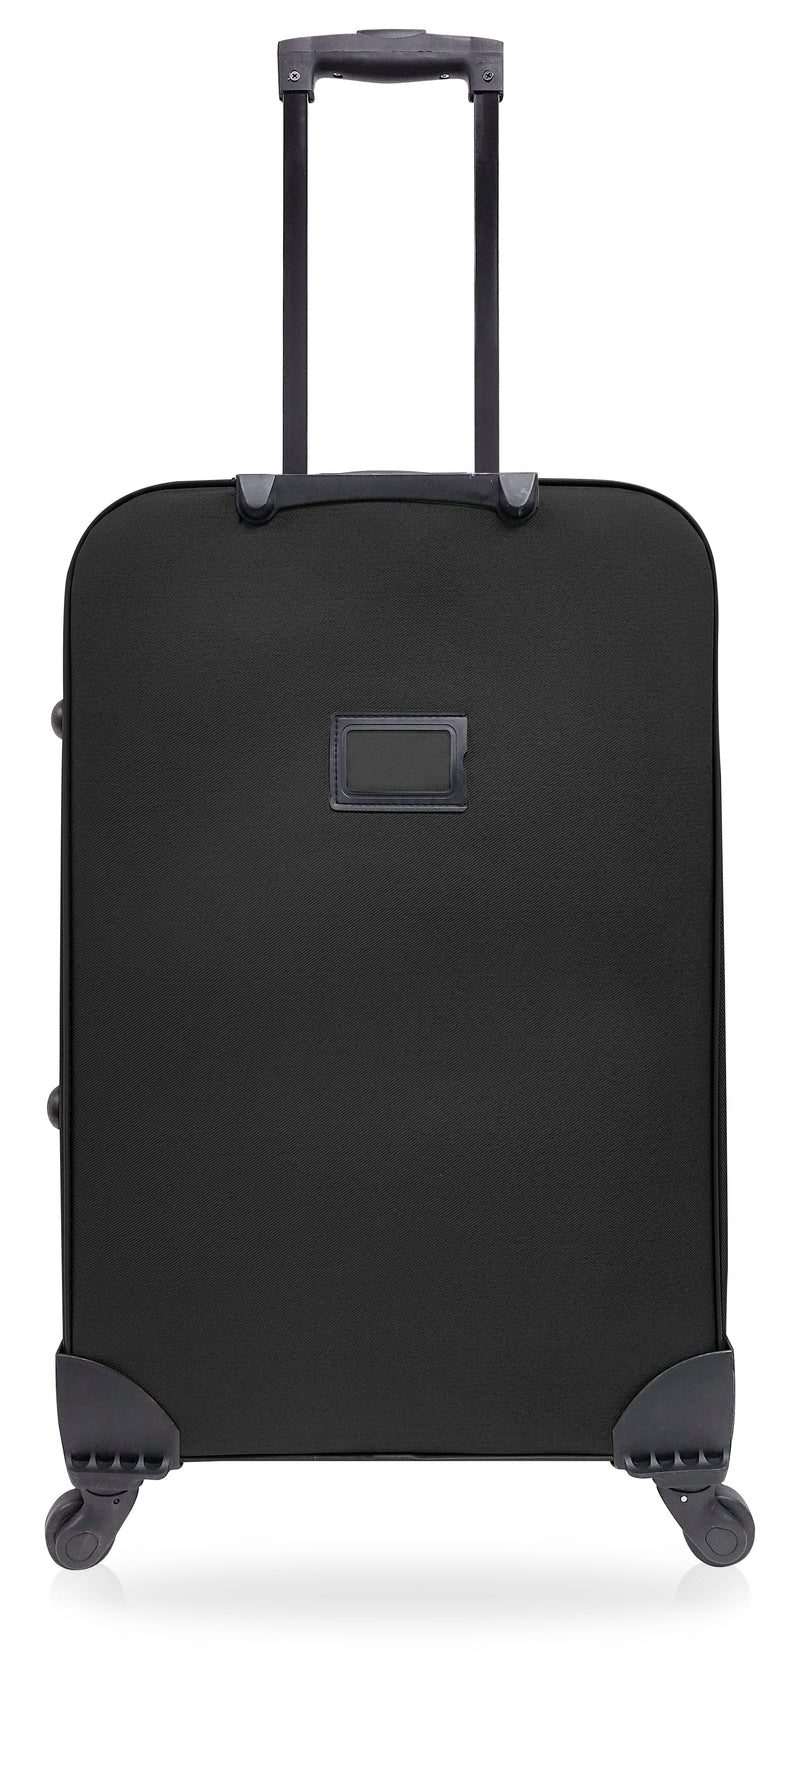 TOSCANO by Tucci 28-inch Allacciare  Lightweight Luggage Suitcase